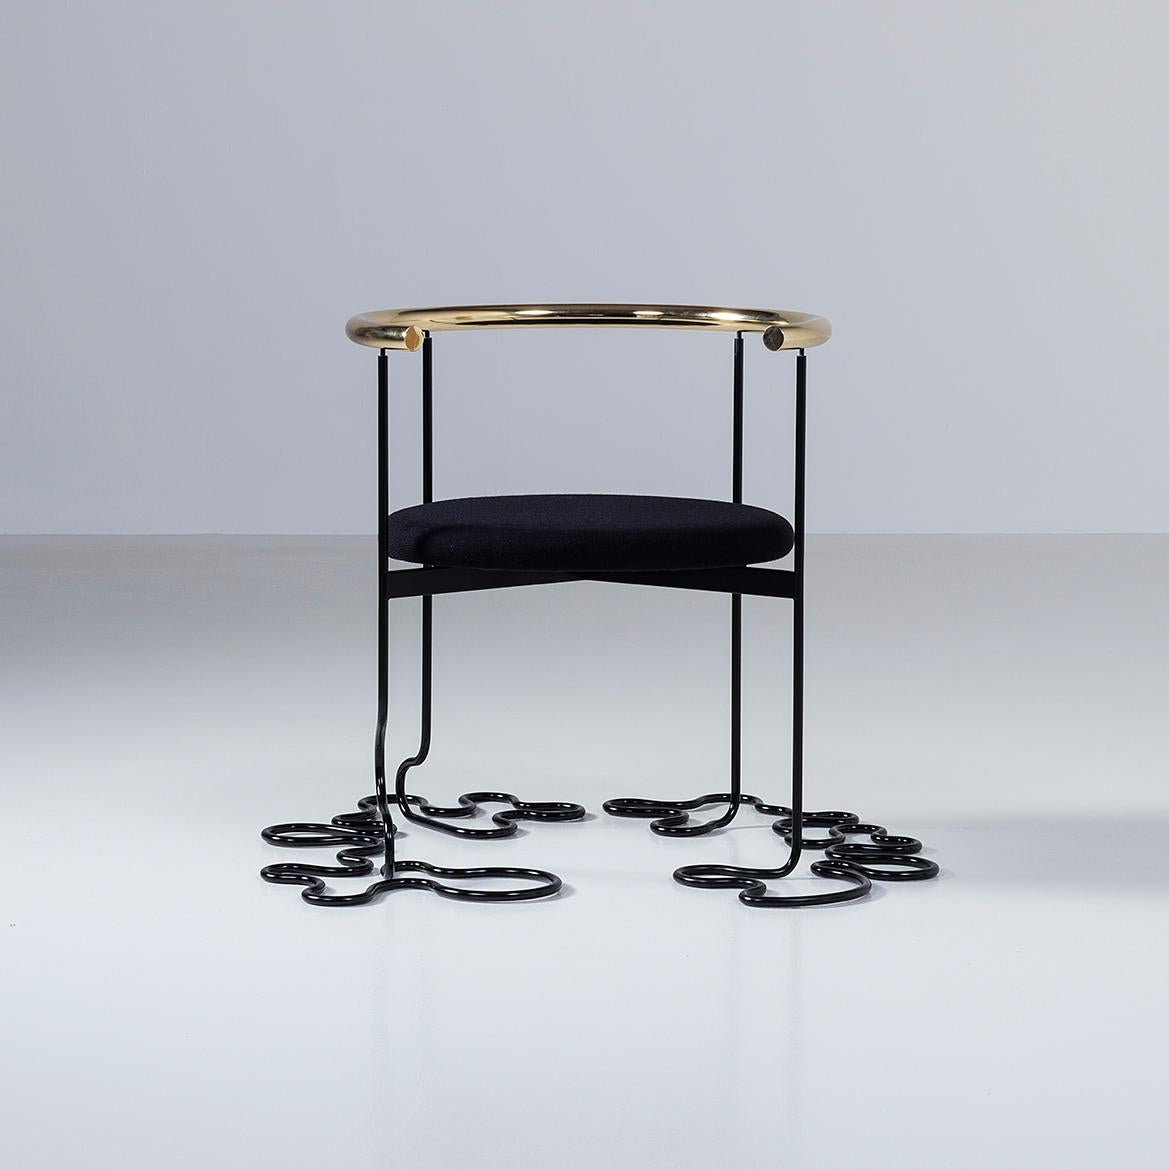 The Nirvana Chair was designed in 1981 by Shigeru Uchida.

Its extraordinary shape was the upmost striking one's that the Black Pipe Chairs series have reached while evolving and being transformed by the momentum of the 1980s. 

Dimensions: W84 D70